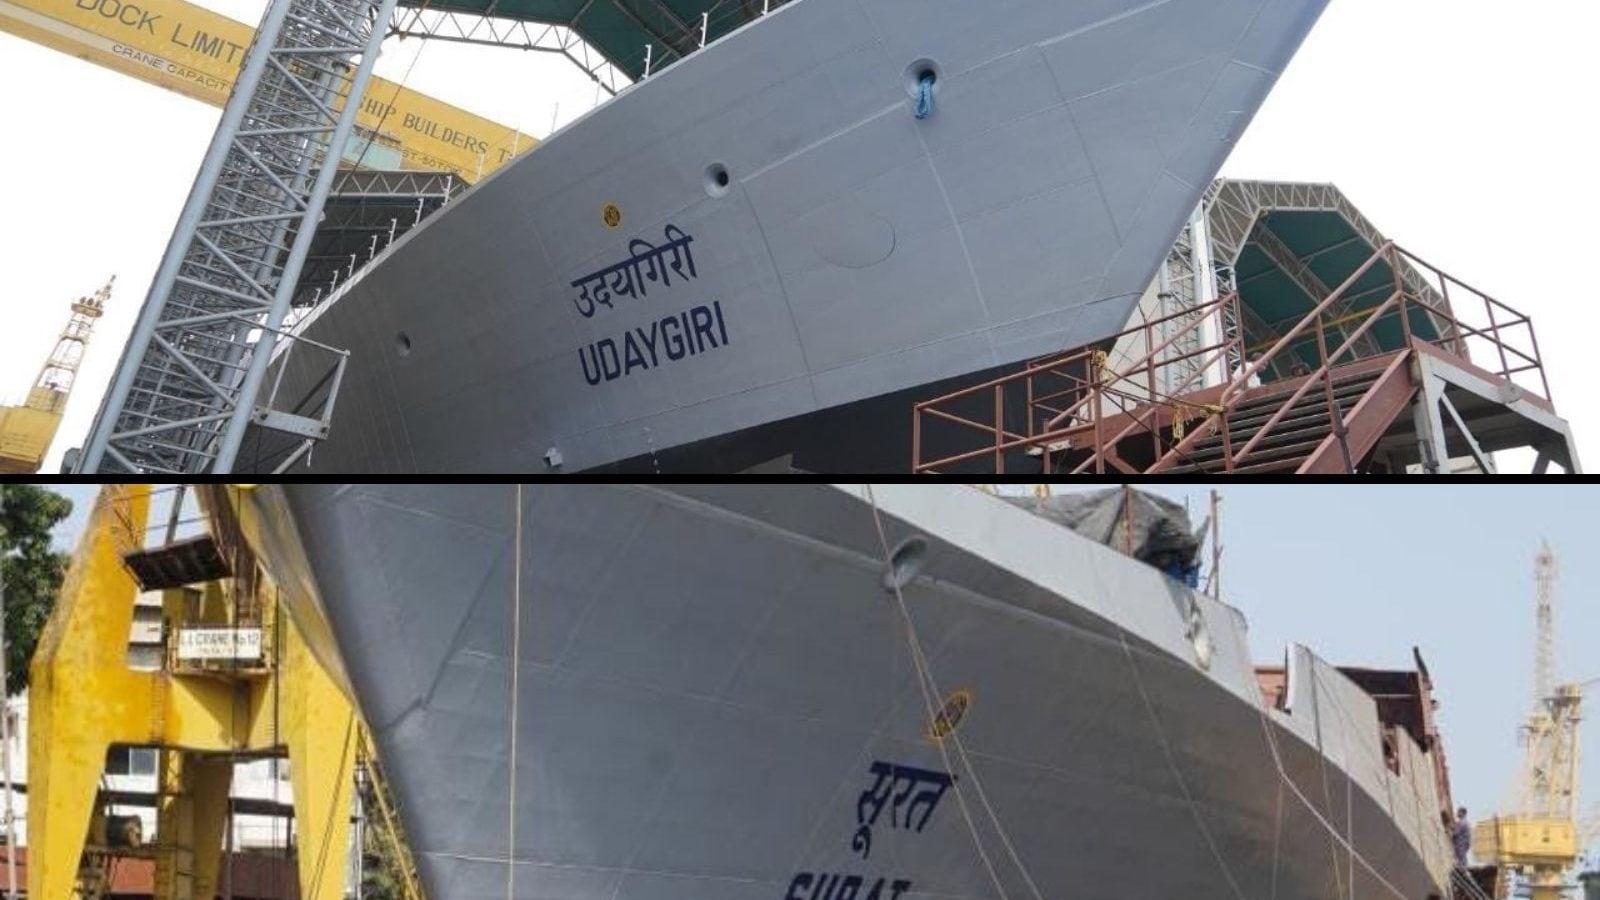 Rajnath Singh launches India-made warships, INS Surat and INS Udaygiri_50.1